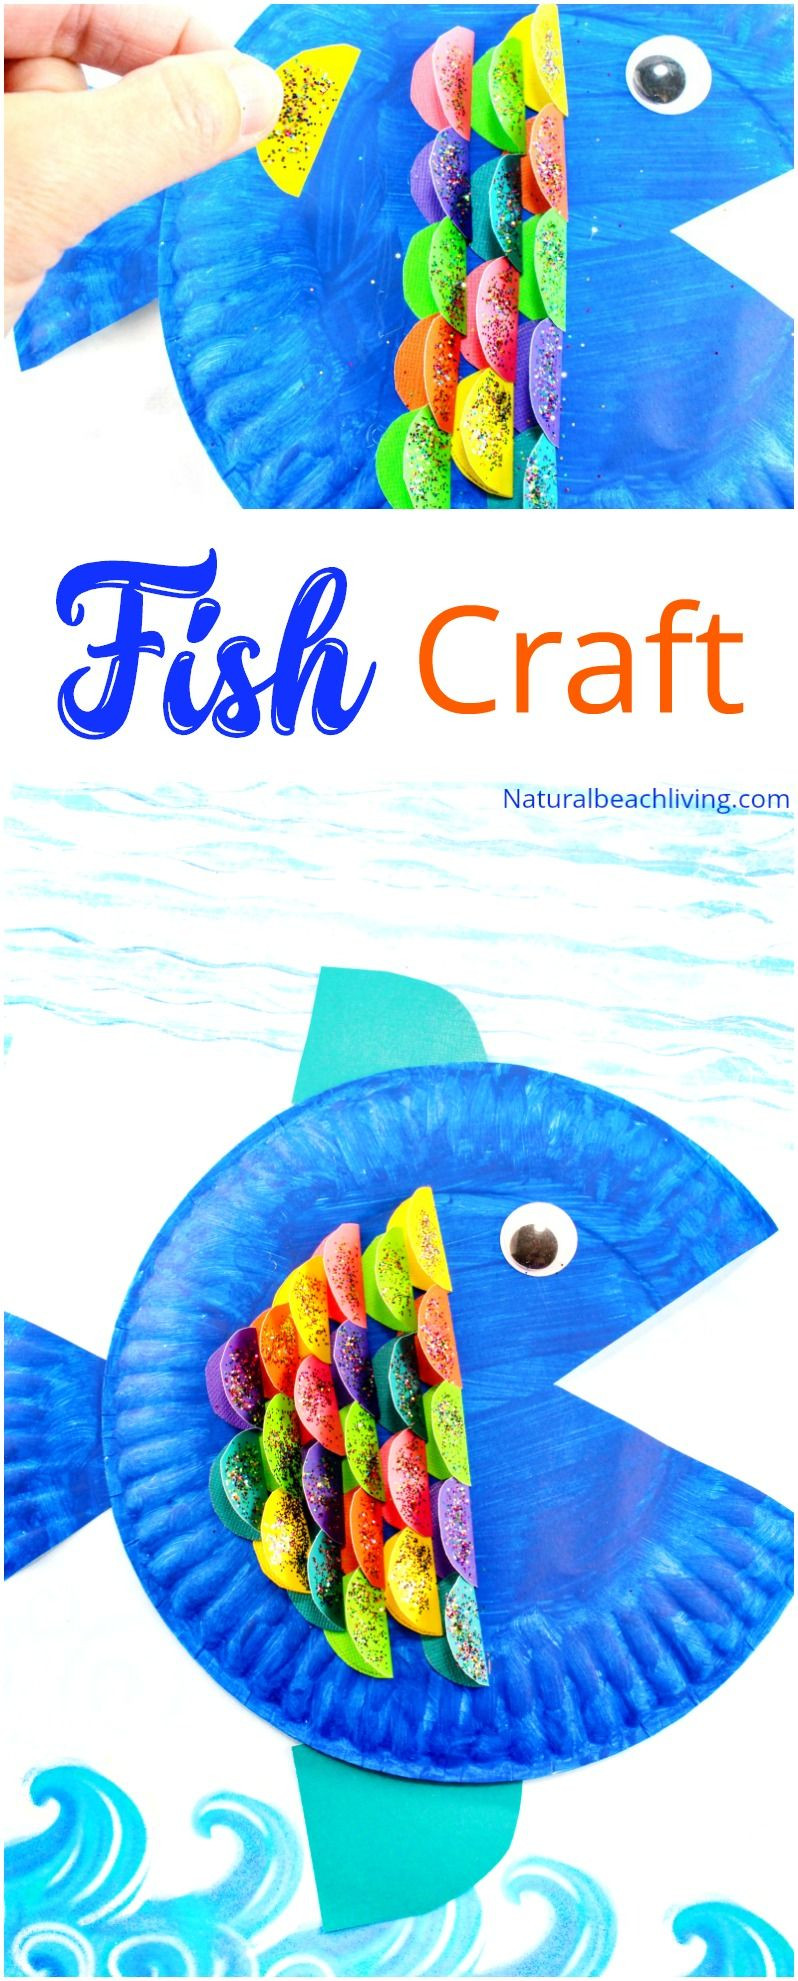 Paper Craft Ideas For Kids Under 5
 Super Cute Paper Plate Fish Craft for Kids